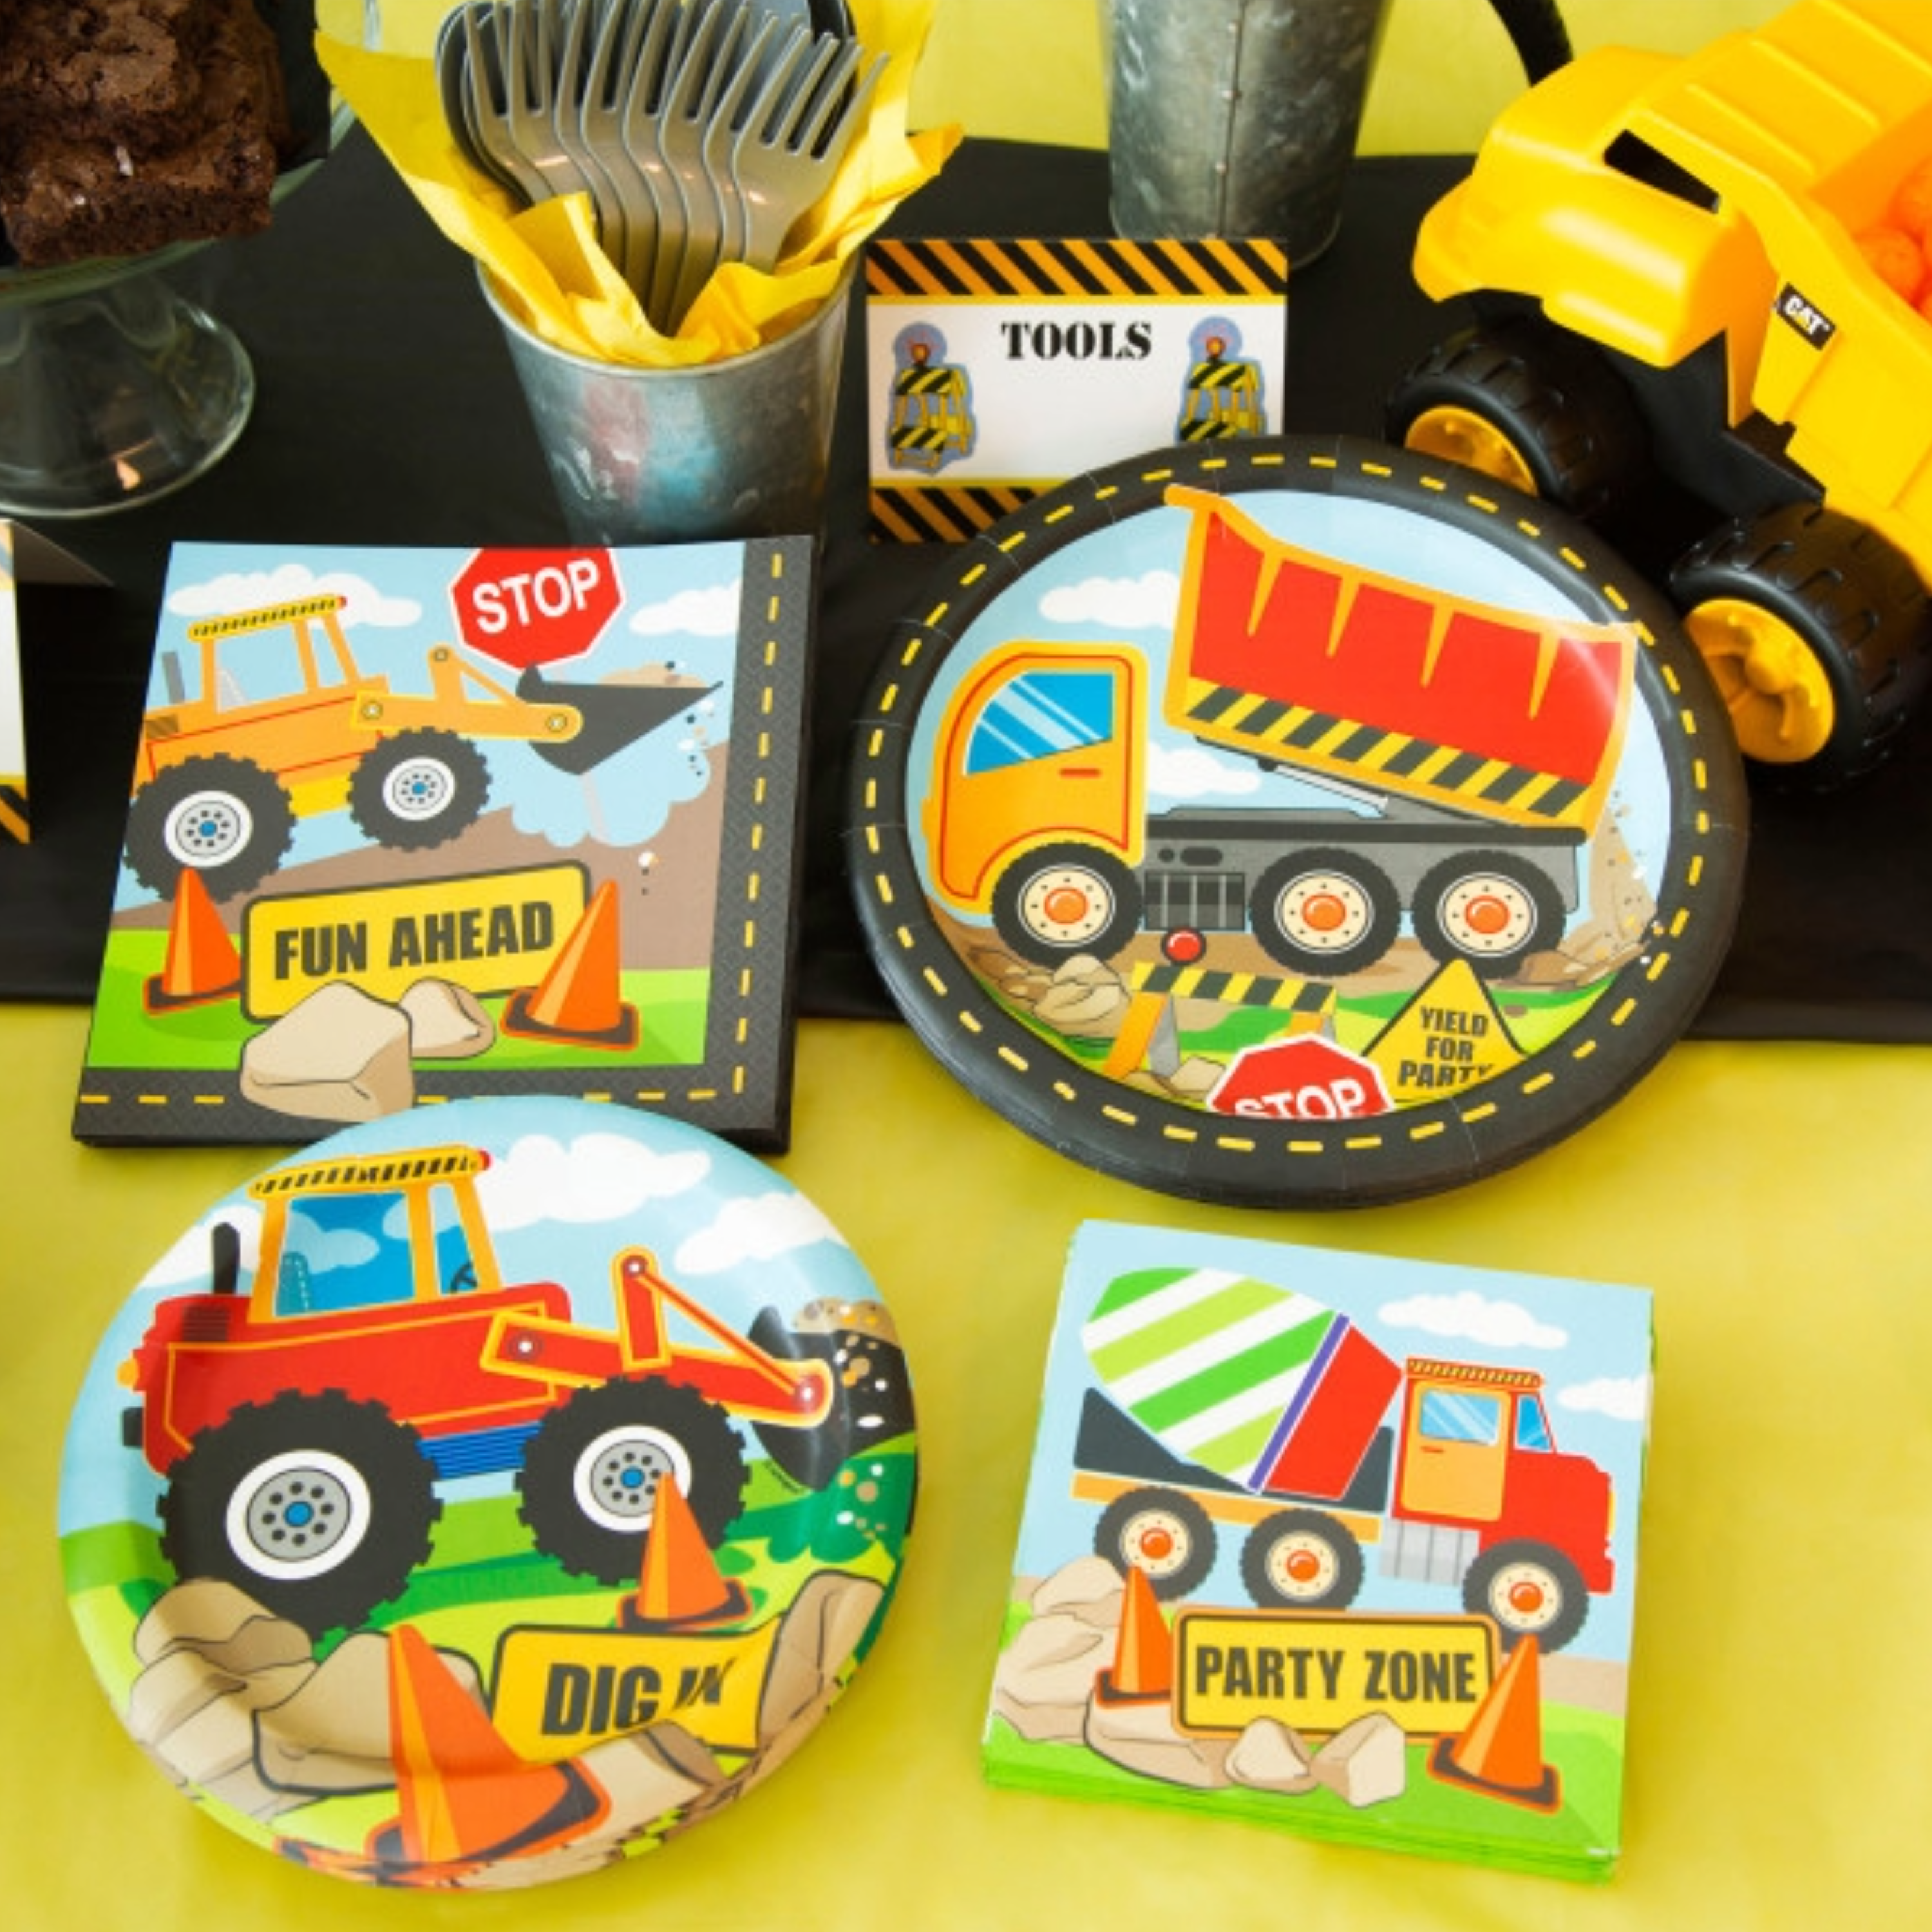 Construction Zone Birthday Party Dinner Plates, Pack of 8 - Amazing Pinatas 